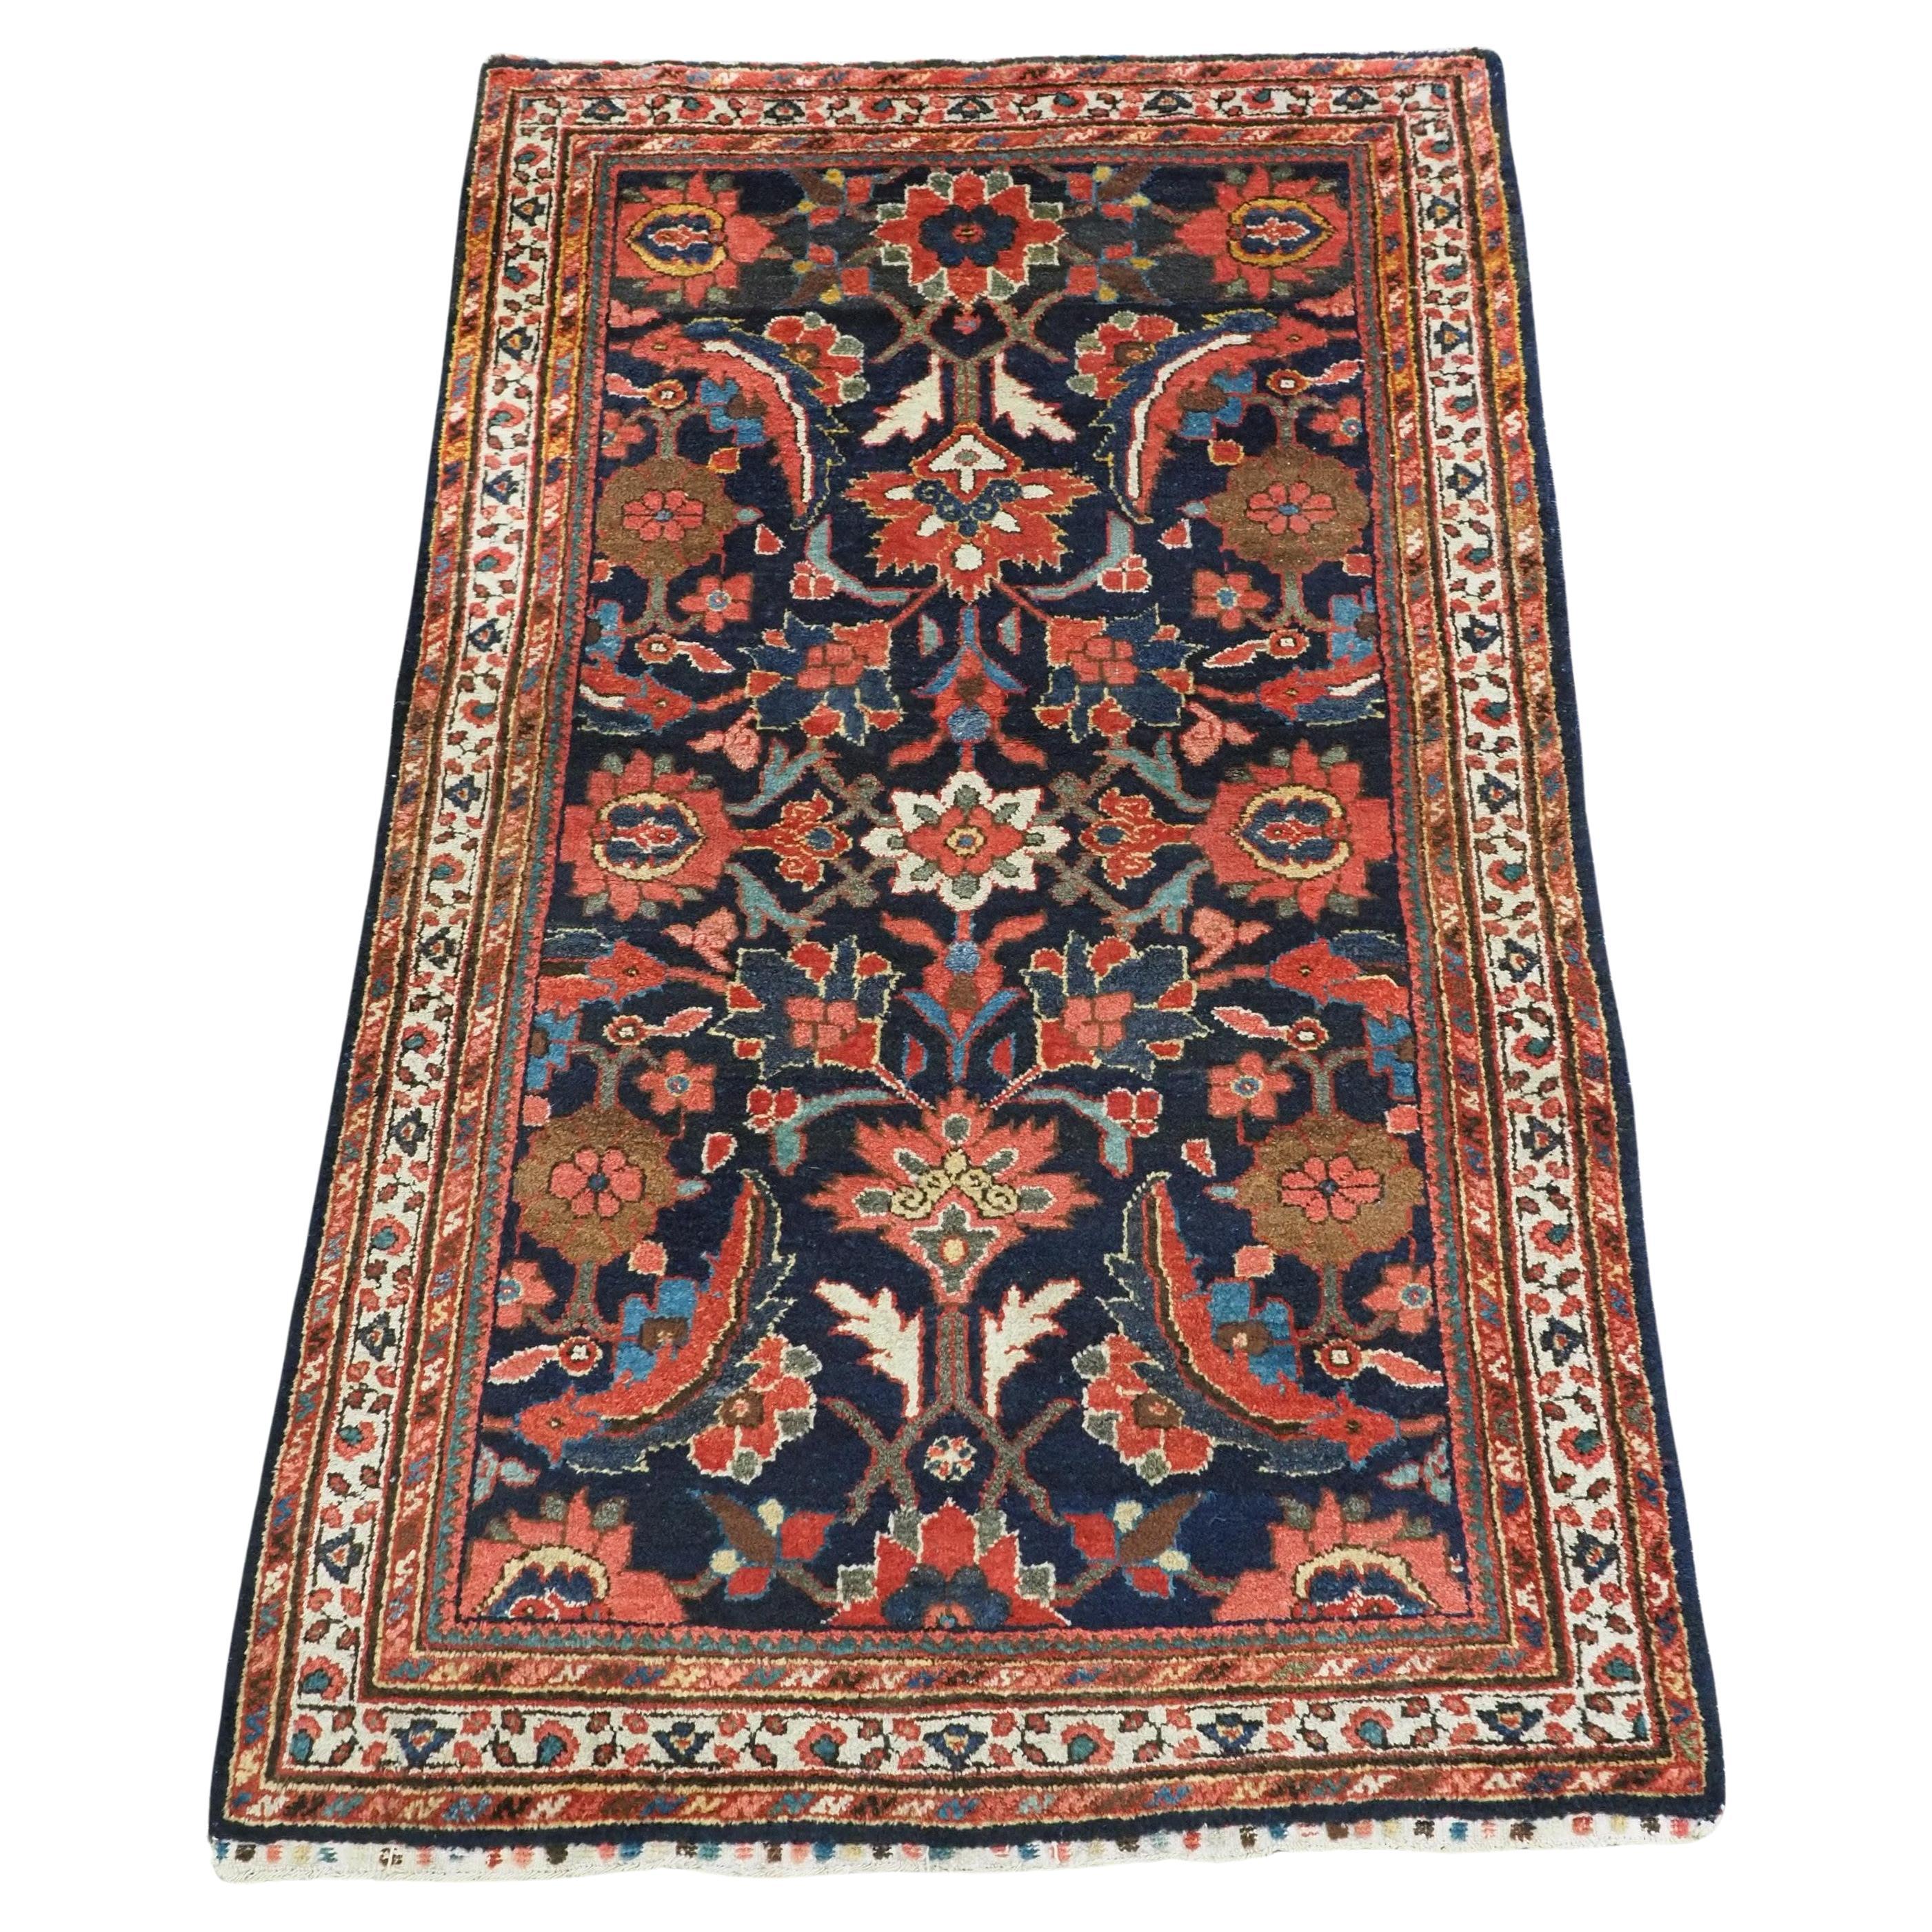  Antique Mahal rug with large scale floral design.  Circa 1920. For Sale